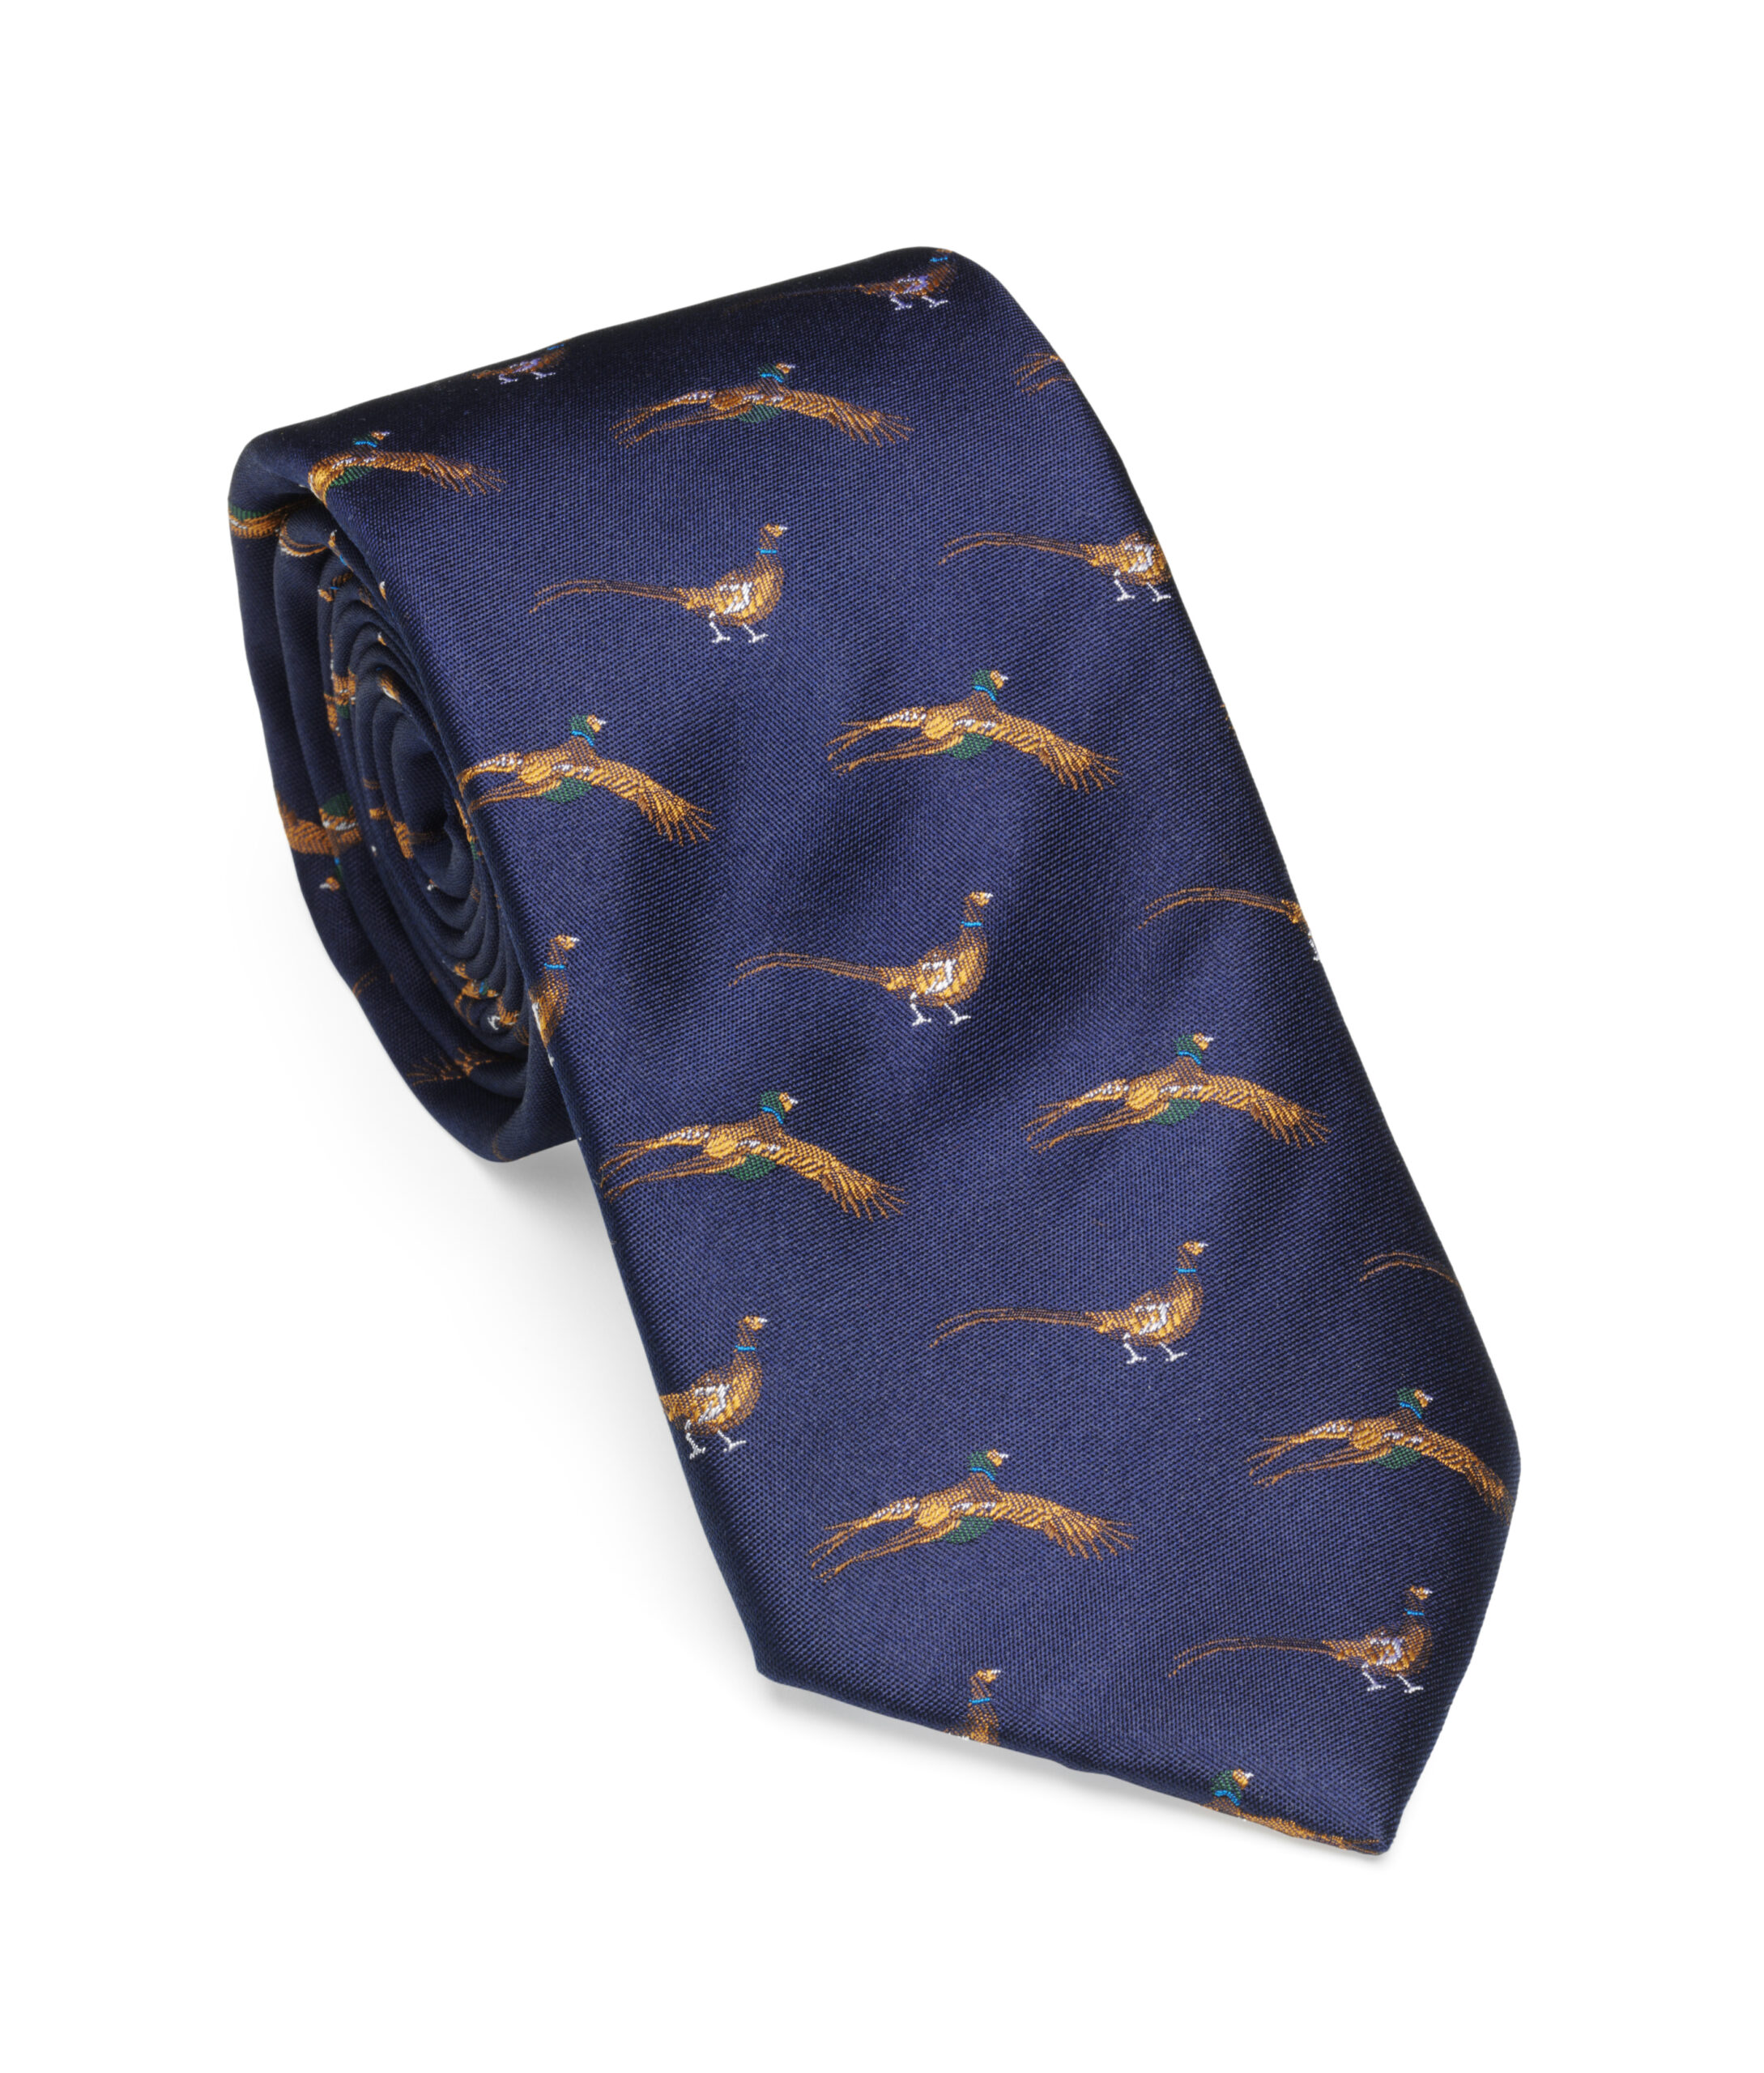 Soprano green Silk Tie with various fly fishing images flies reels & fish rods 